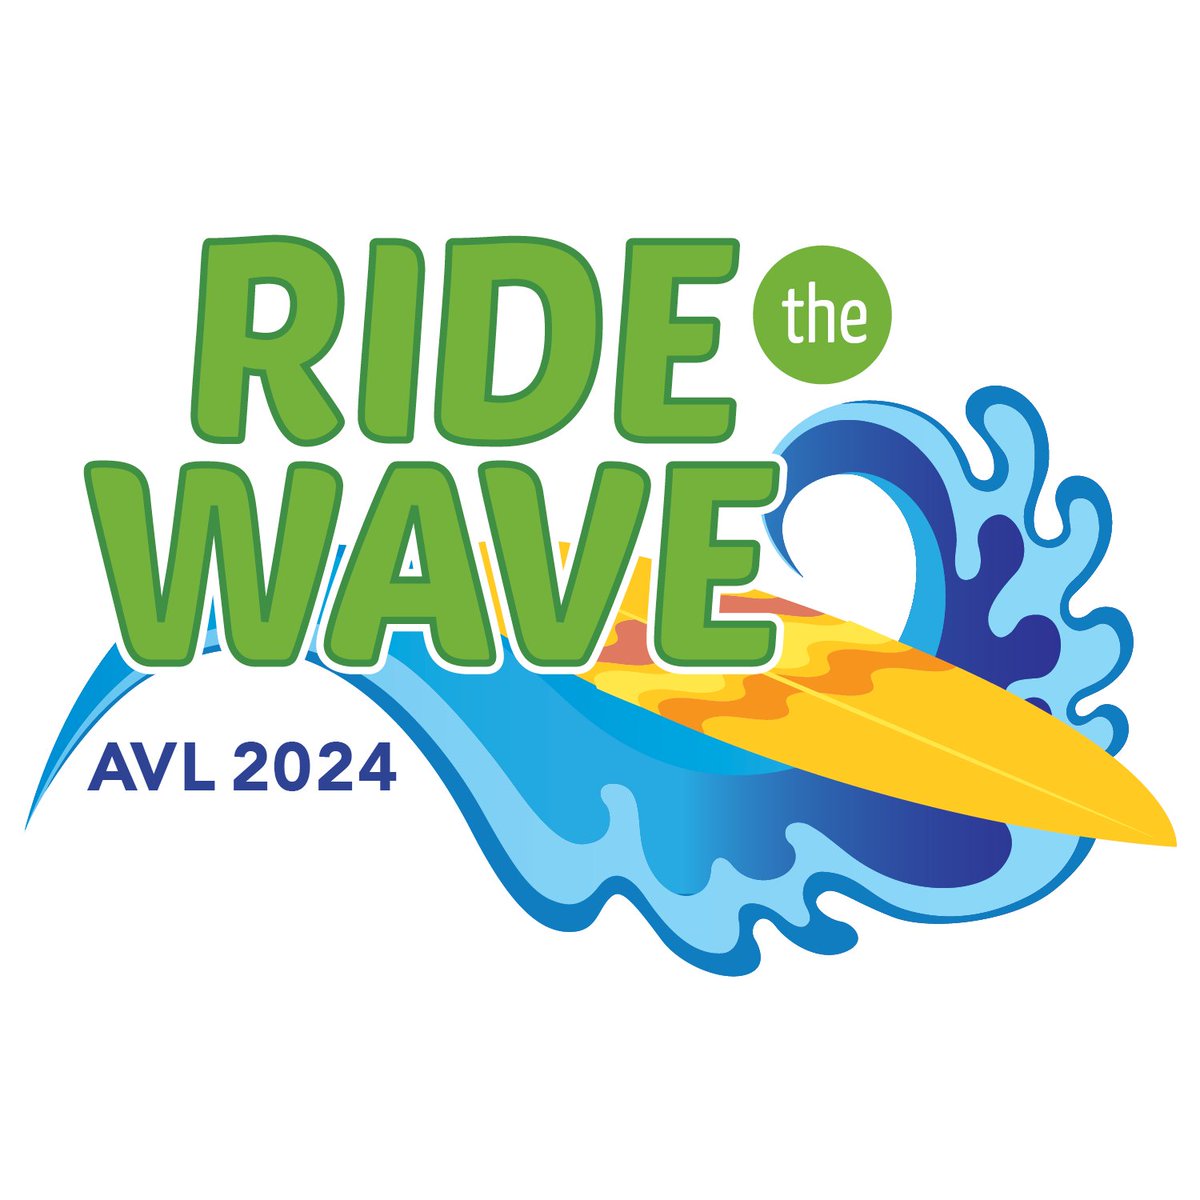 Prepare to unlock your potential and ride the #VisibleLearning wave at #AVL2024! Join us in San Diego July 8-11 to explore groundbreaking Visible Learning research. Secure your spot here: ow.ly/ios050R7IGS